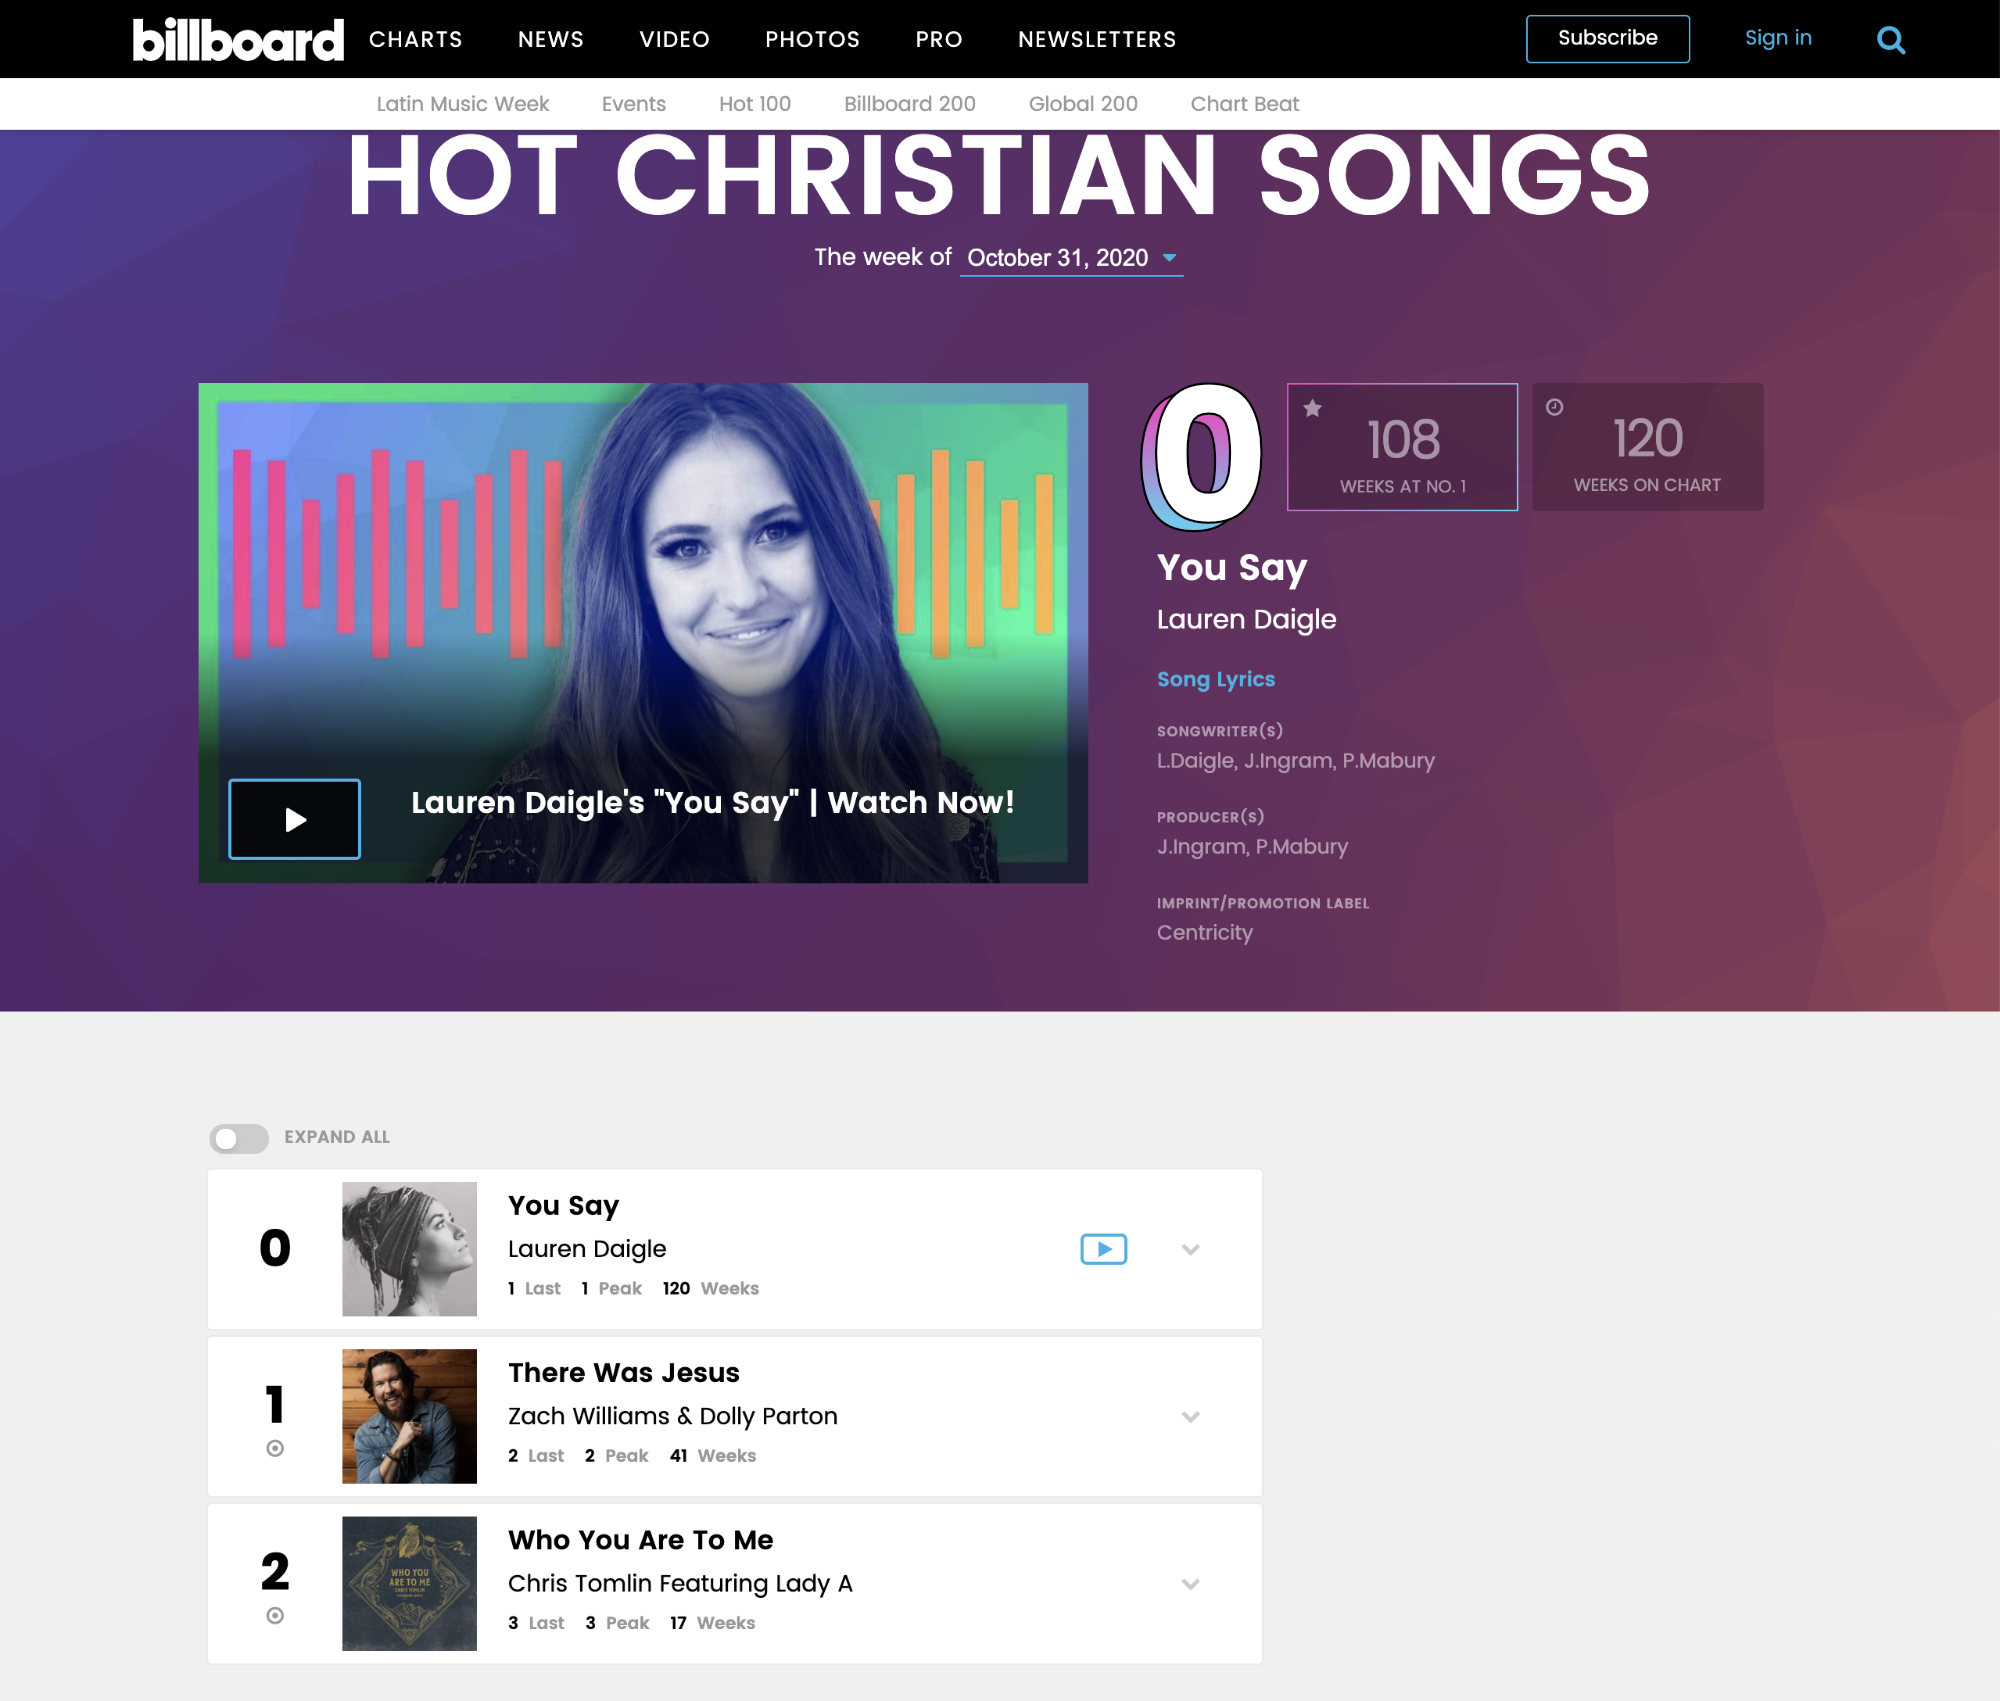 The Billboard Hot Christian songs chart edited to show Lauren Daigle's song You Say as the number 0 song.